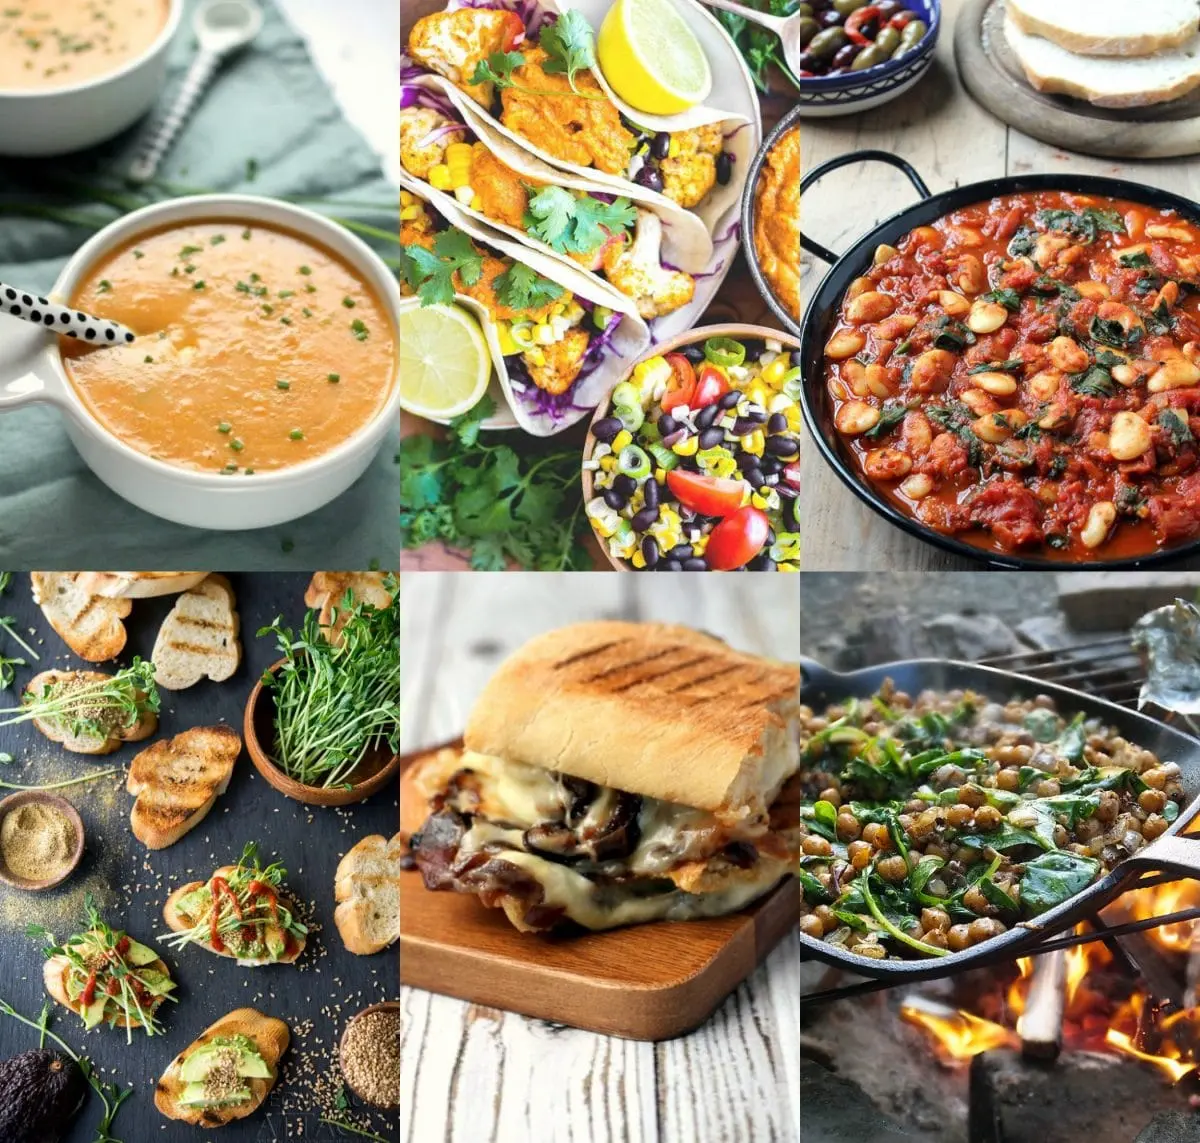 smoked vegetarian dishes - What is the most famous vegetarian dish